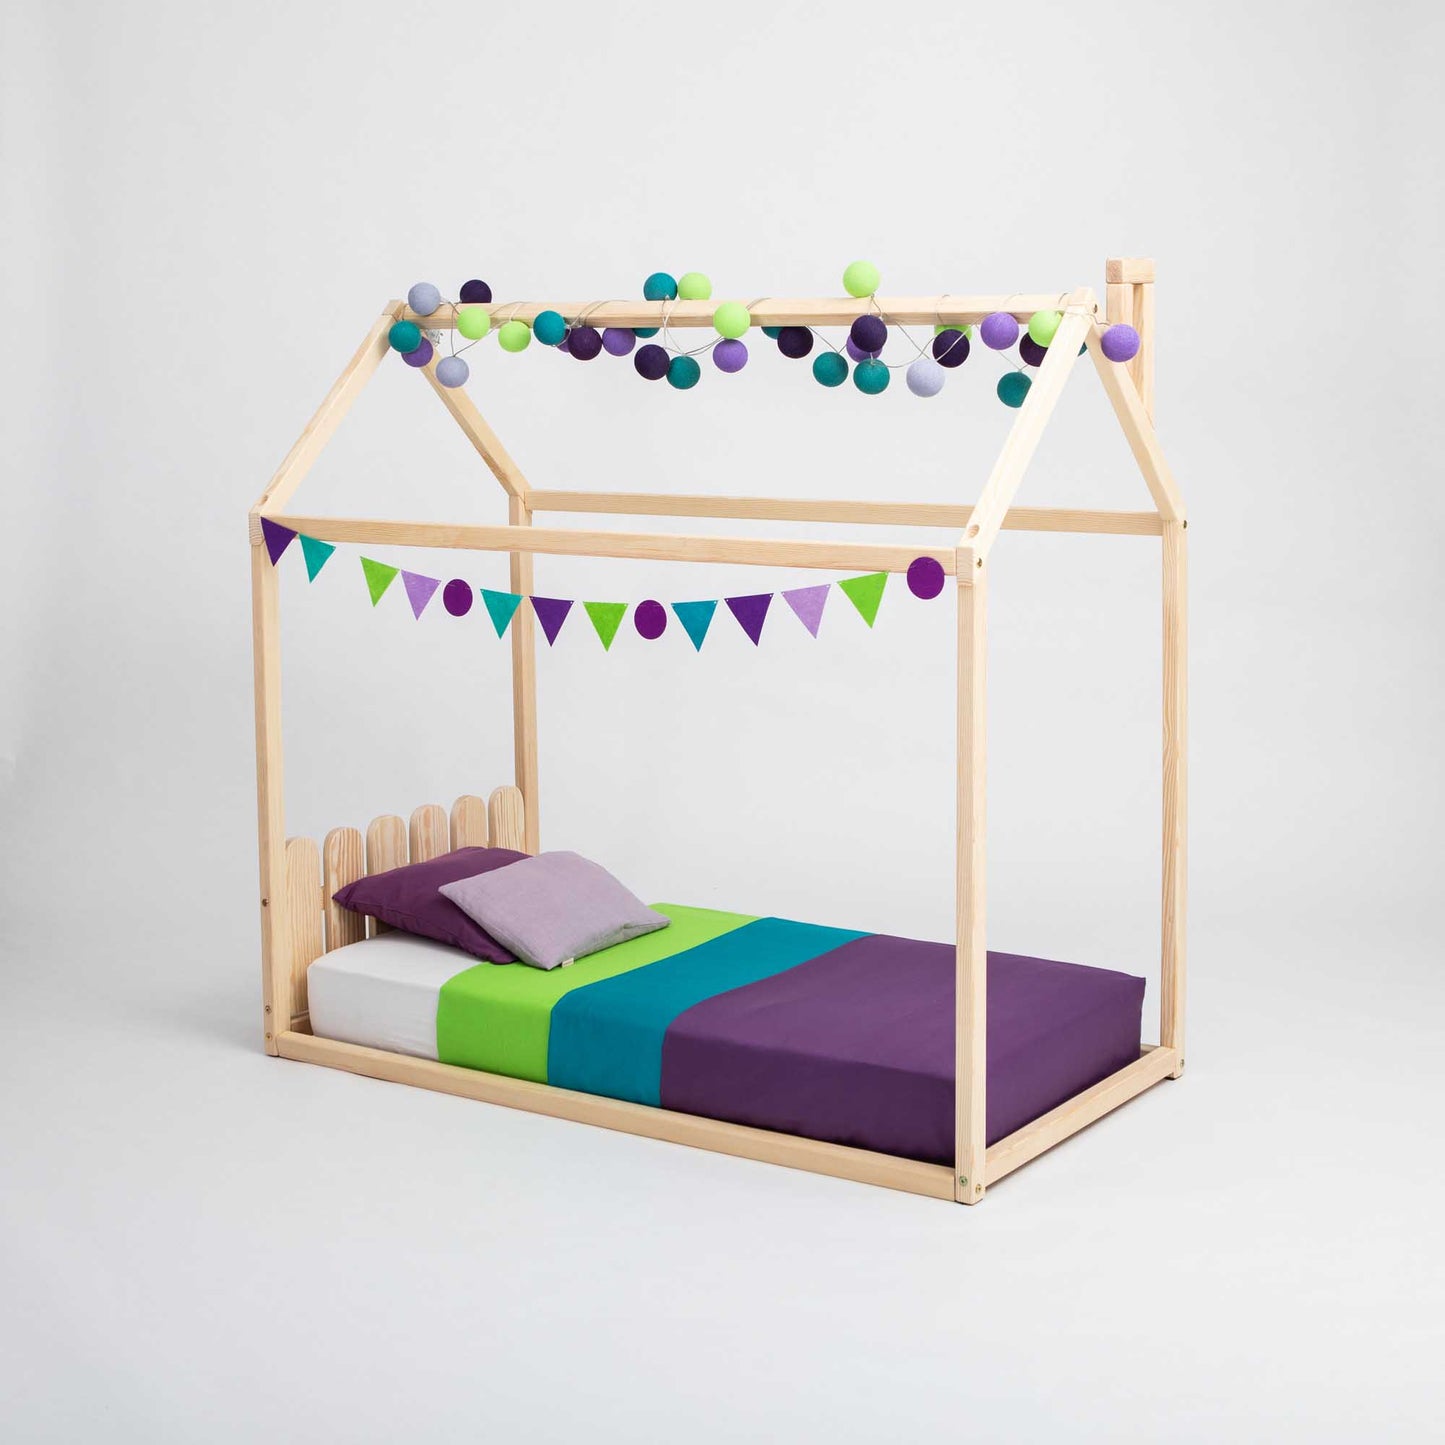 A child's wooden Kids' house-frame bed with a picket fence headboard, designed in a montessori house bed style.